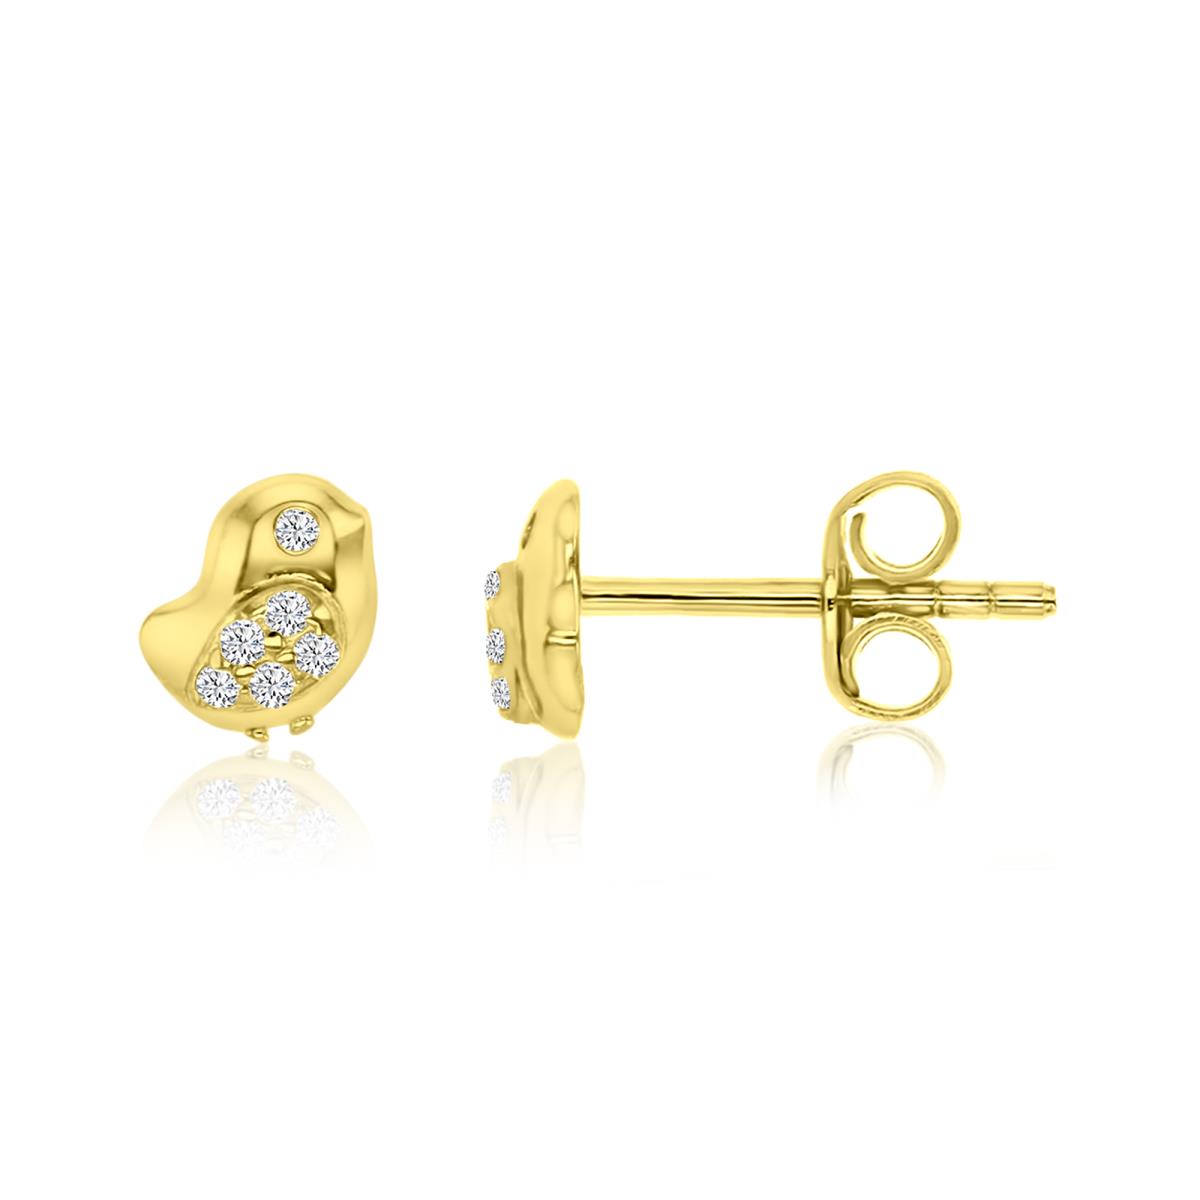 Sterling Silver Yellow 1M 5X4MM Polished White CZ Bird Stud Earrings